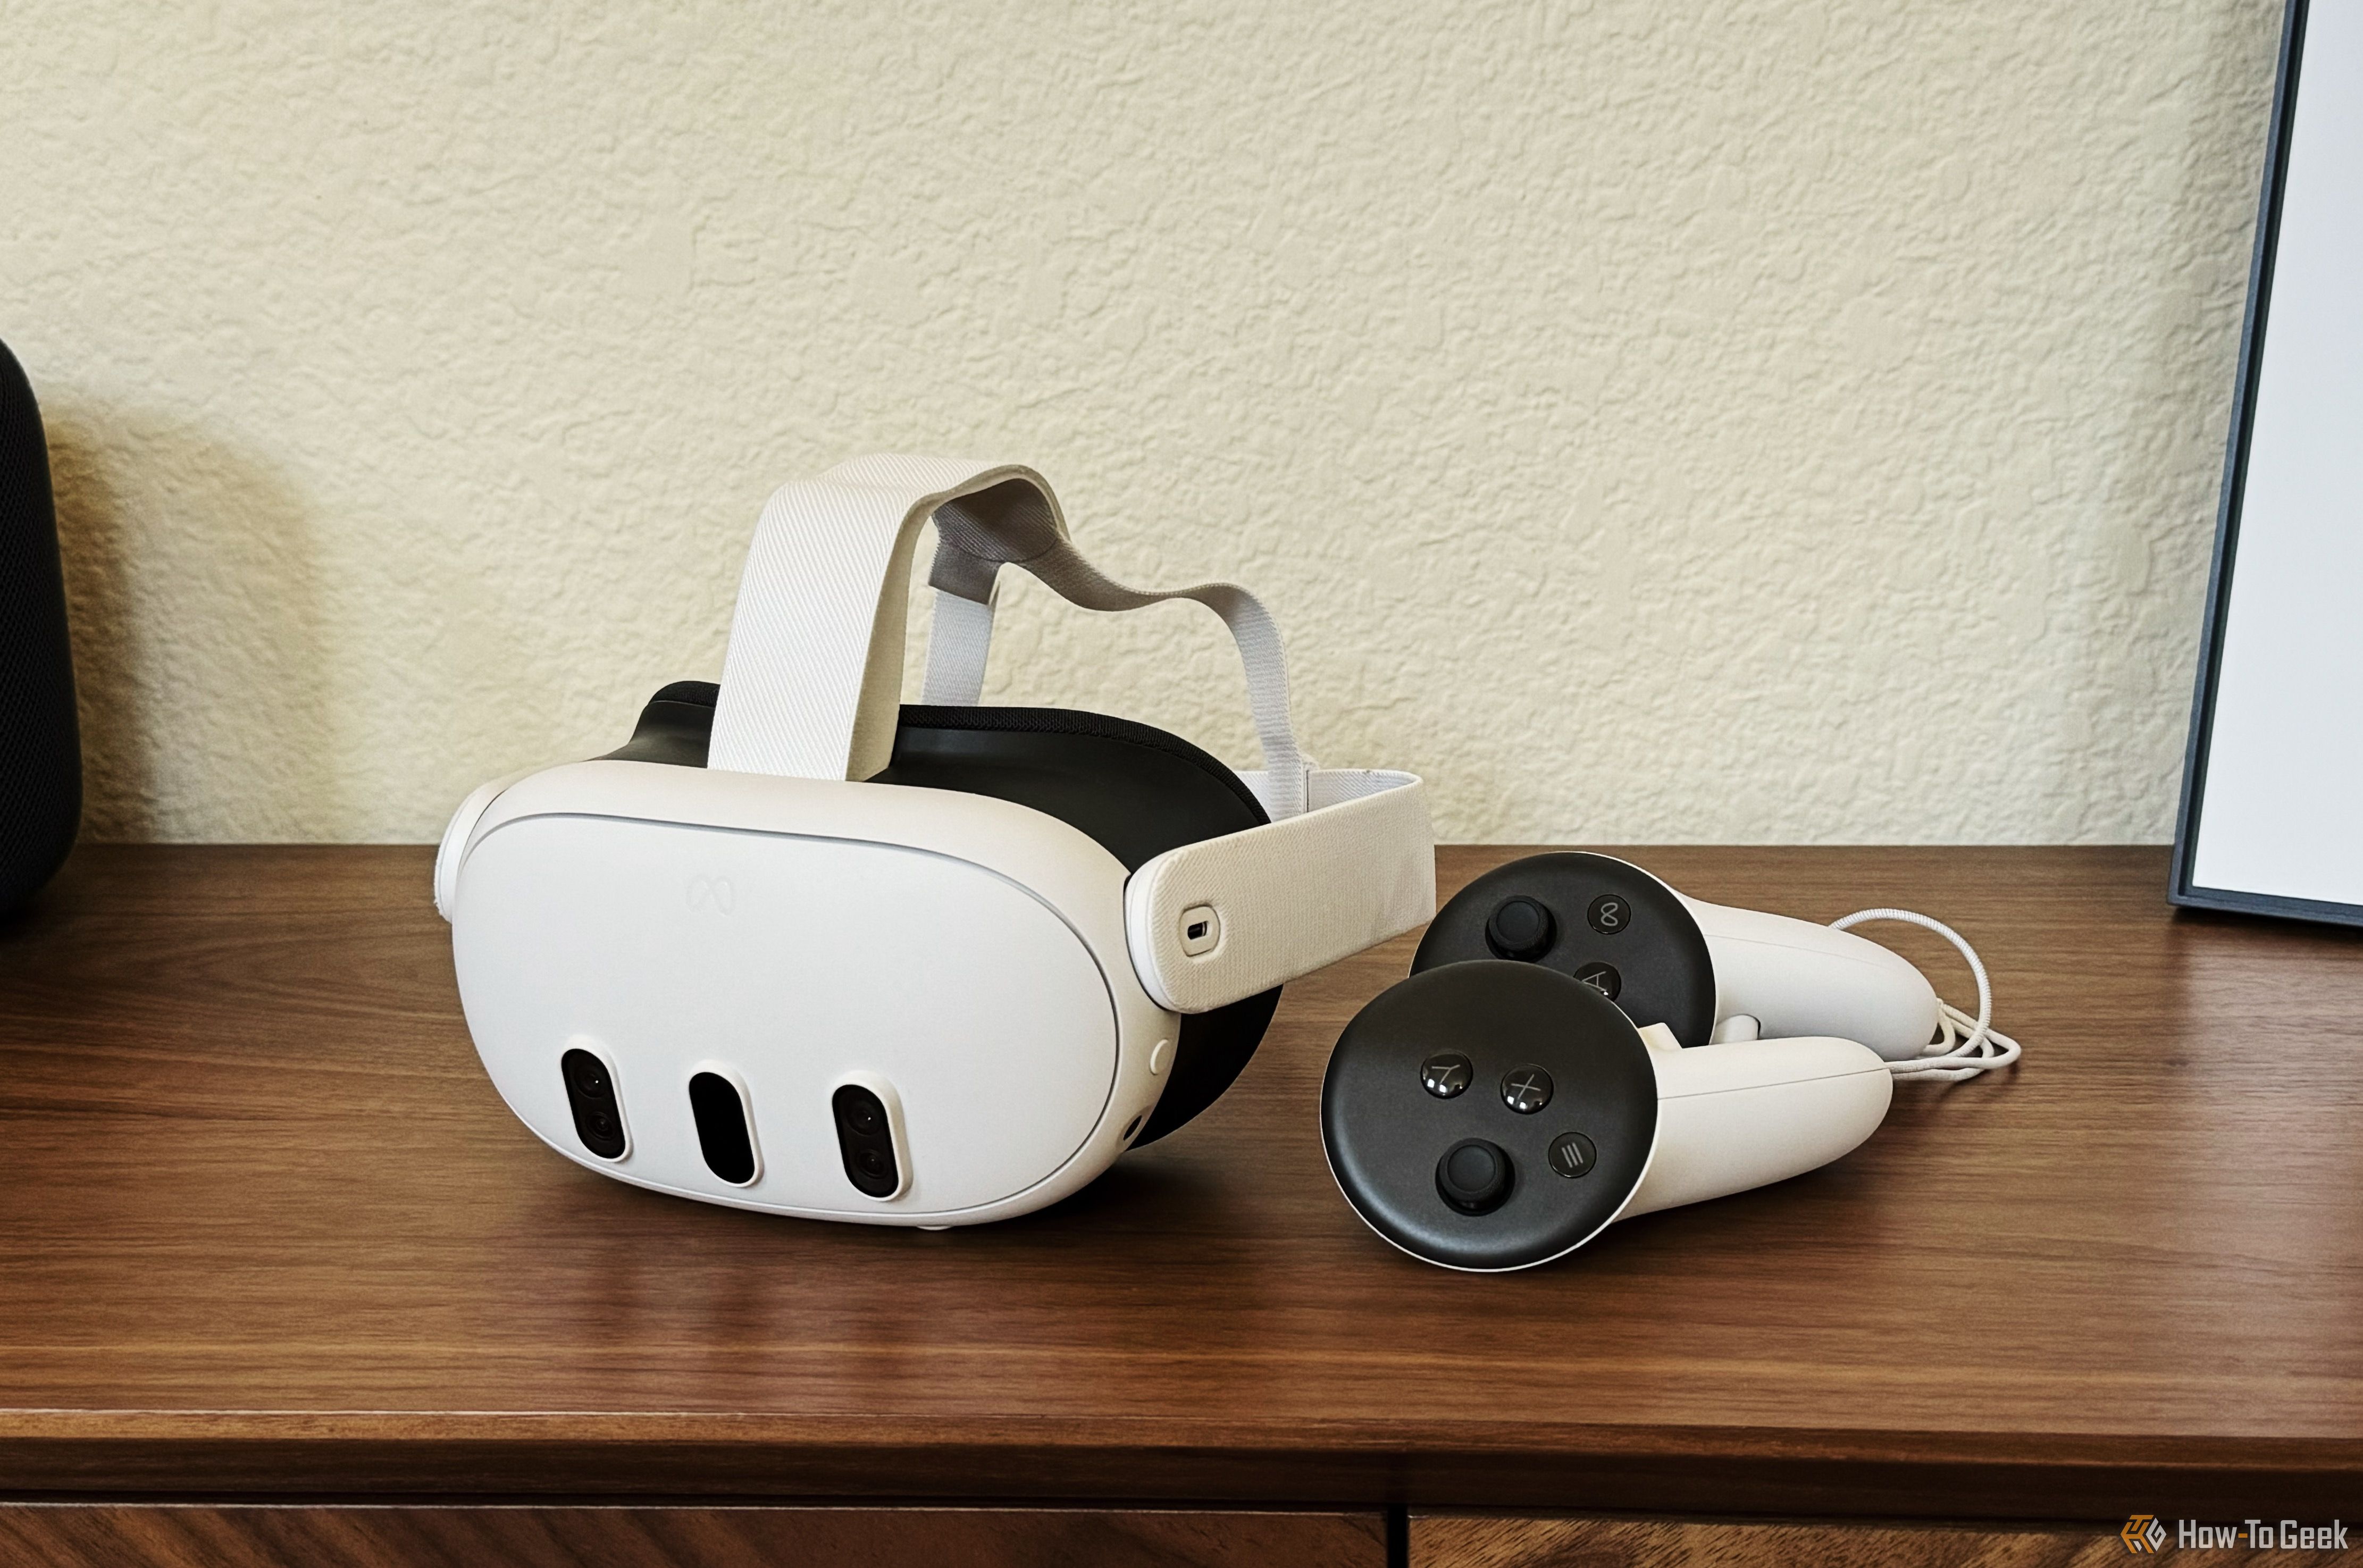 Quest 3 headset and controllers sitting on a table